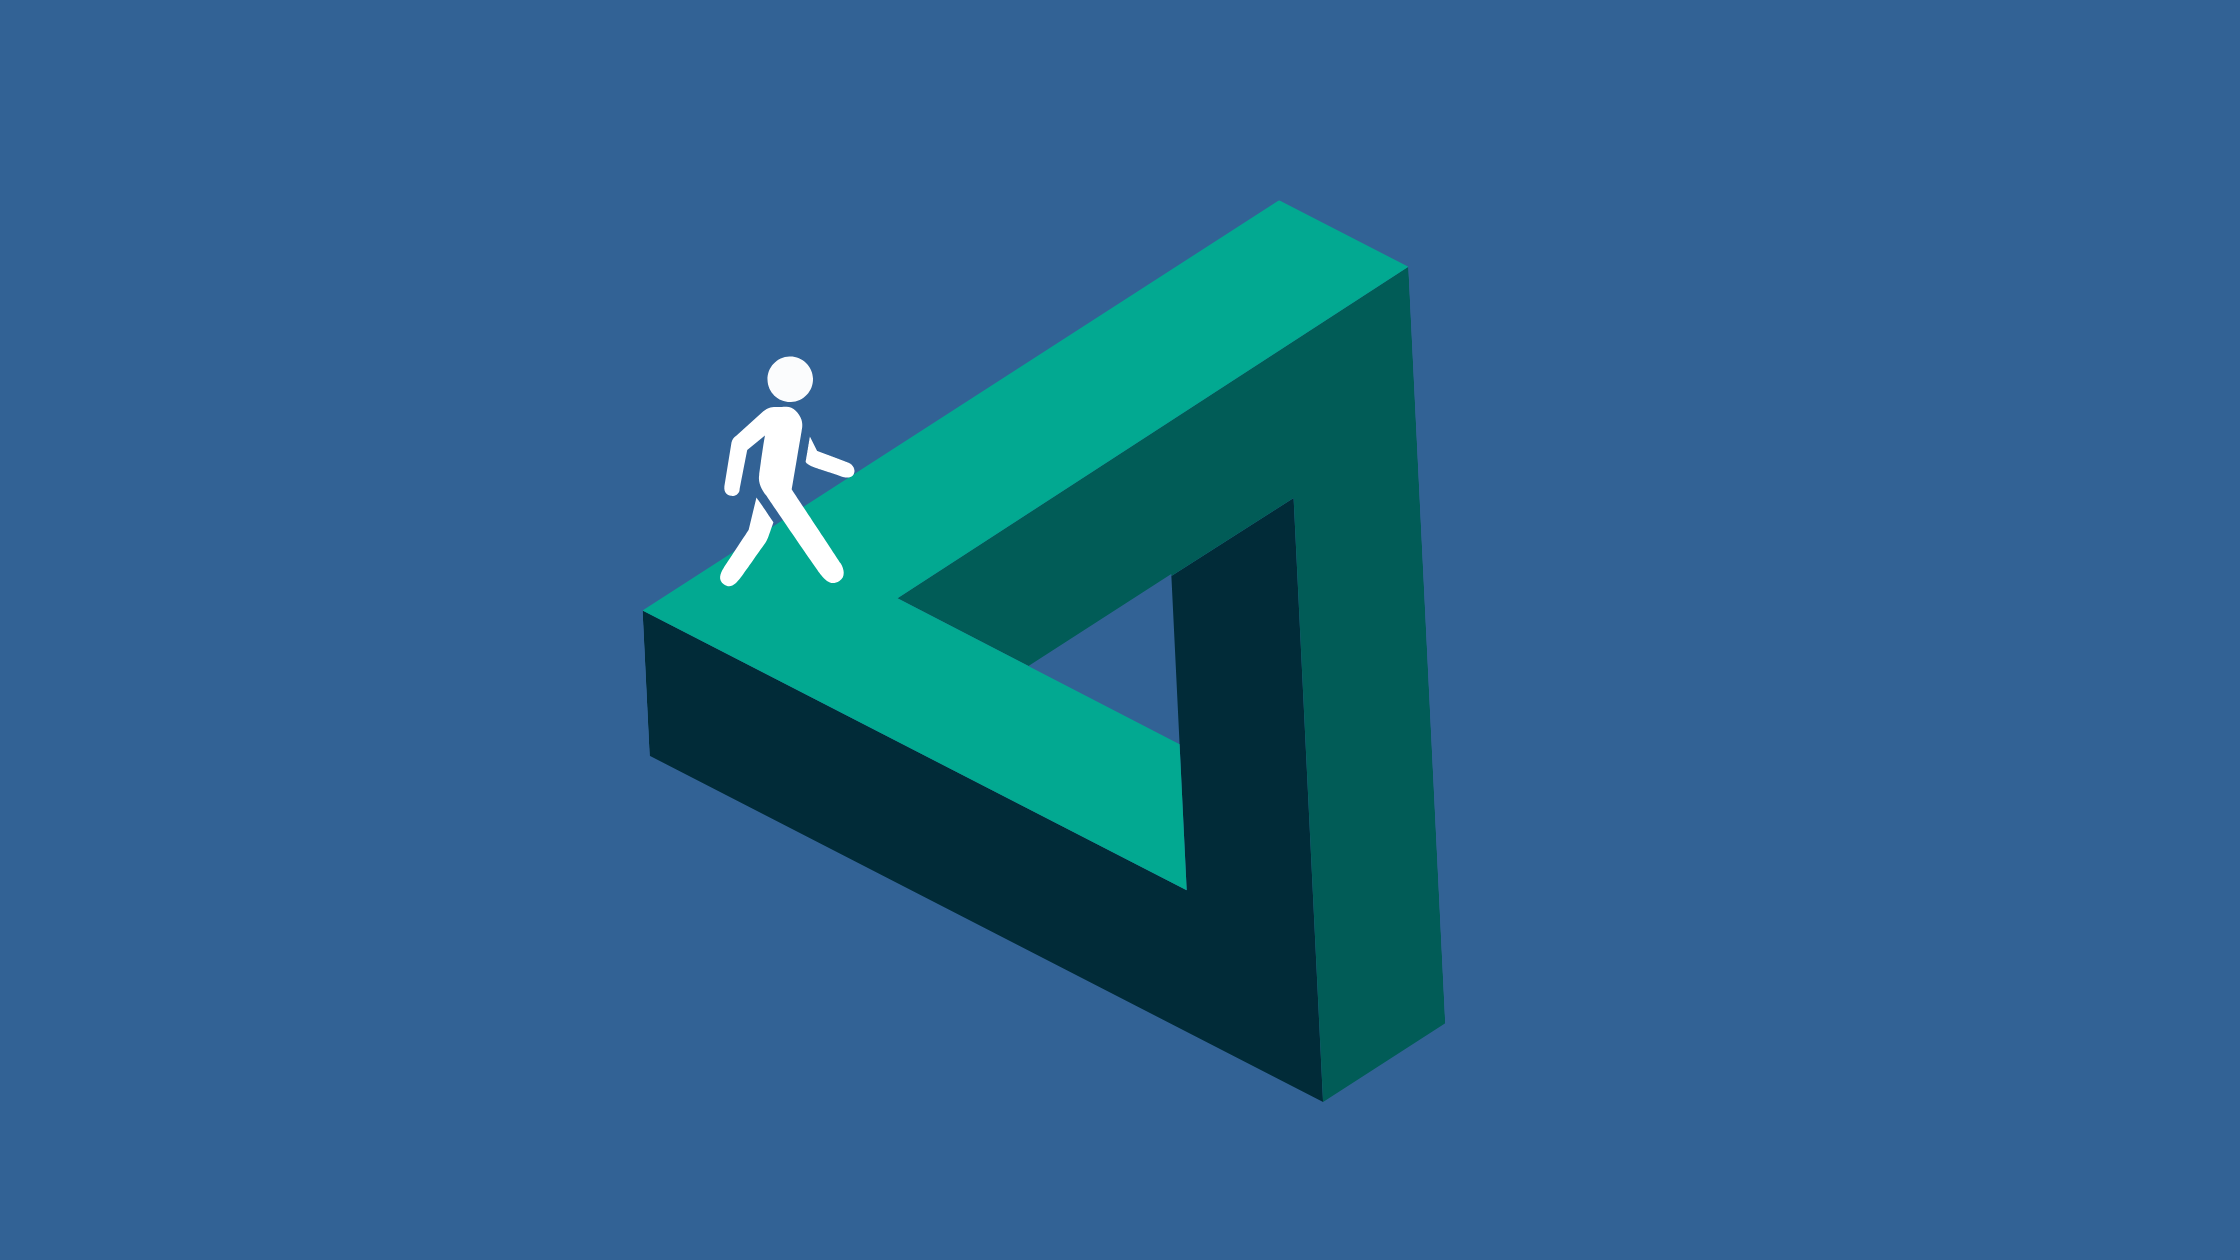 Paradox triangle with a different shade of green on each side with a white icon of a person walking on top. Image is on a blue background.